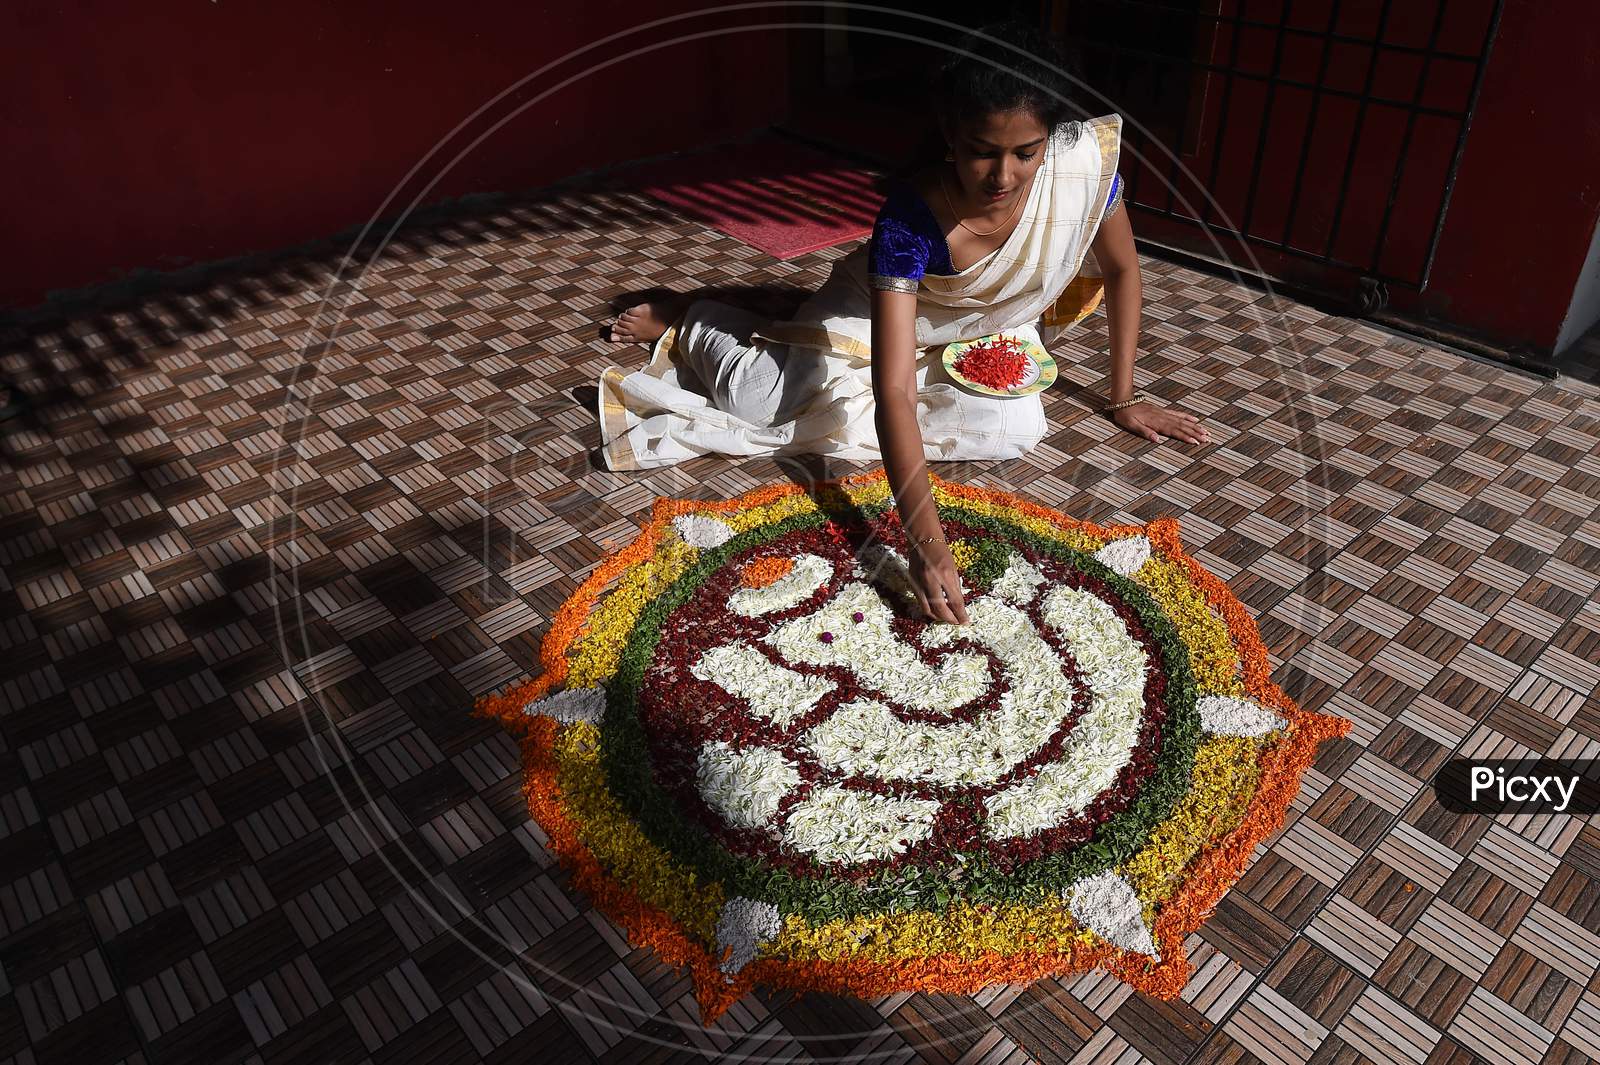 Image Of A Young Woman Prepares Pookalam On The Eve Of Onam Festival In Chennai Monday Aug 